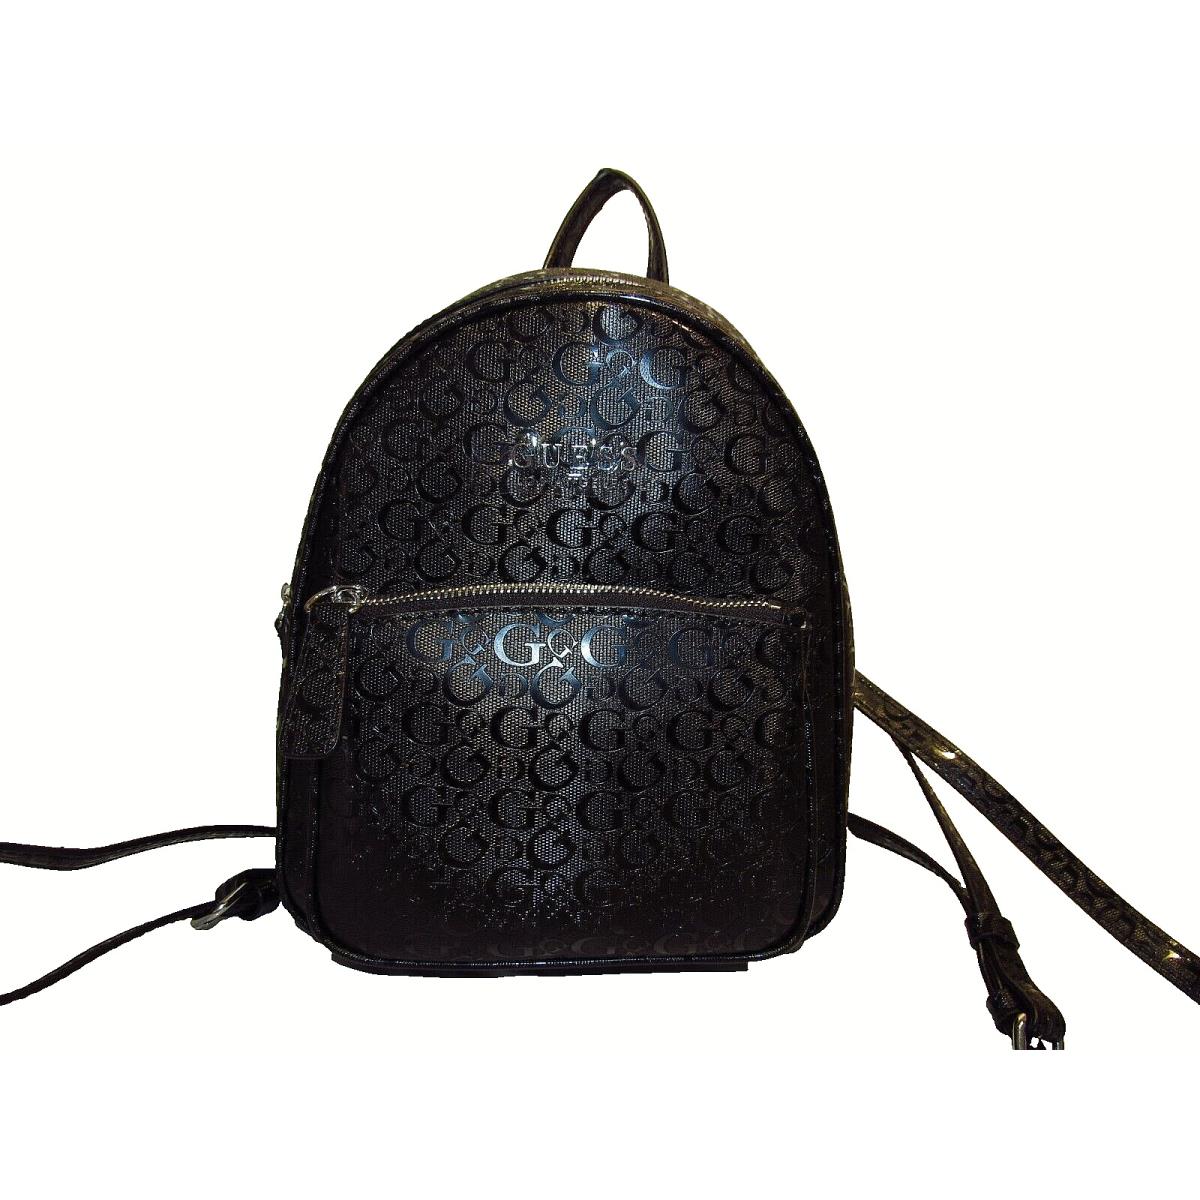 Laine Guess Backpack Hand/shoulder Bag in Black Free US Shipping